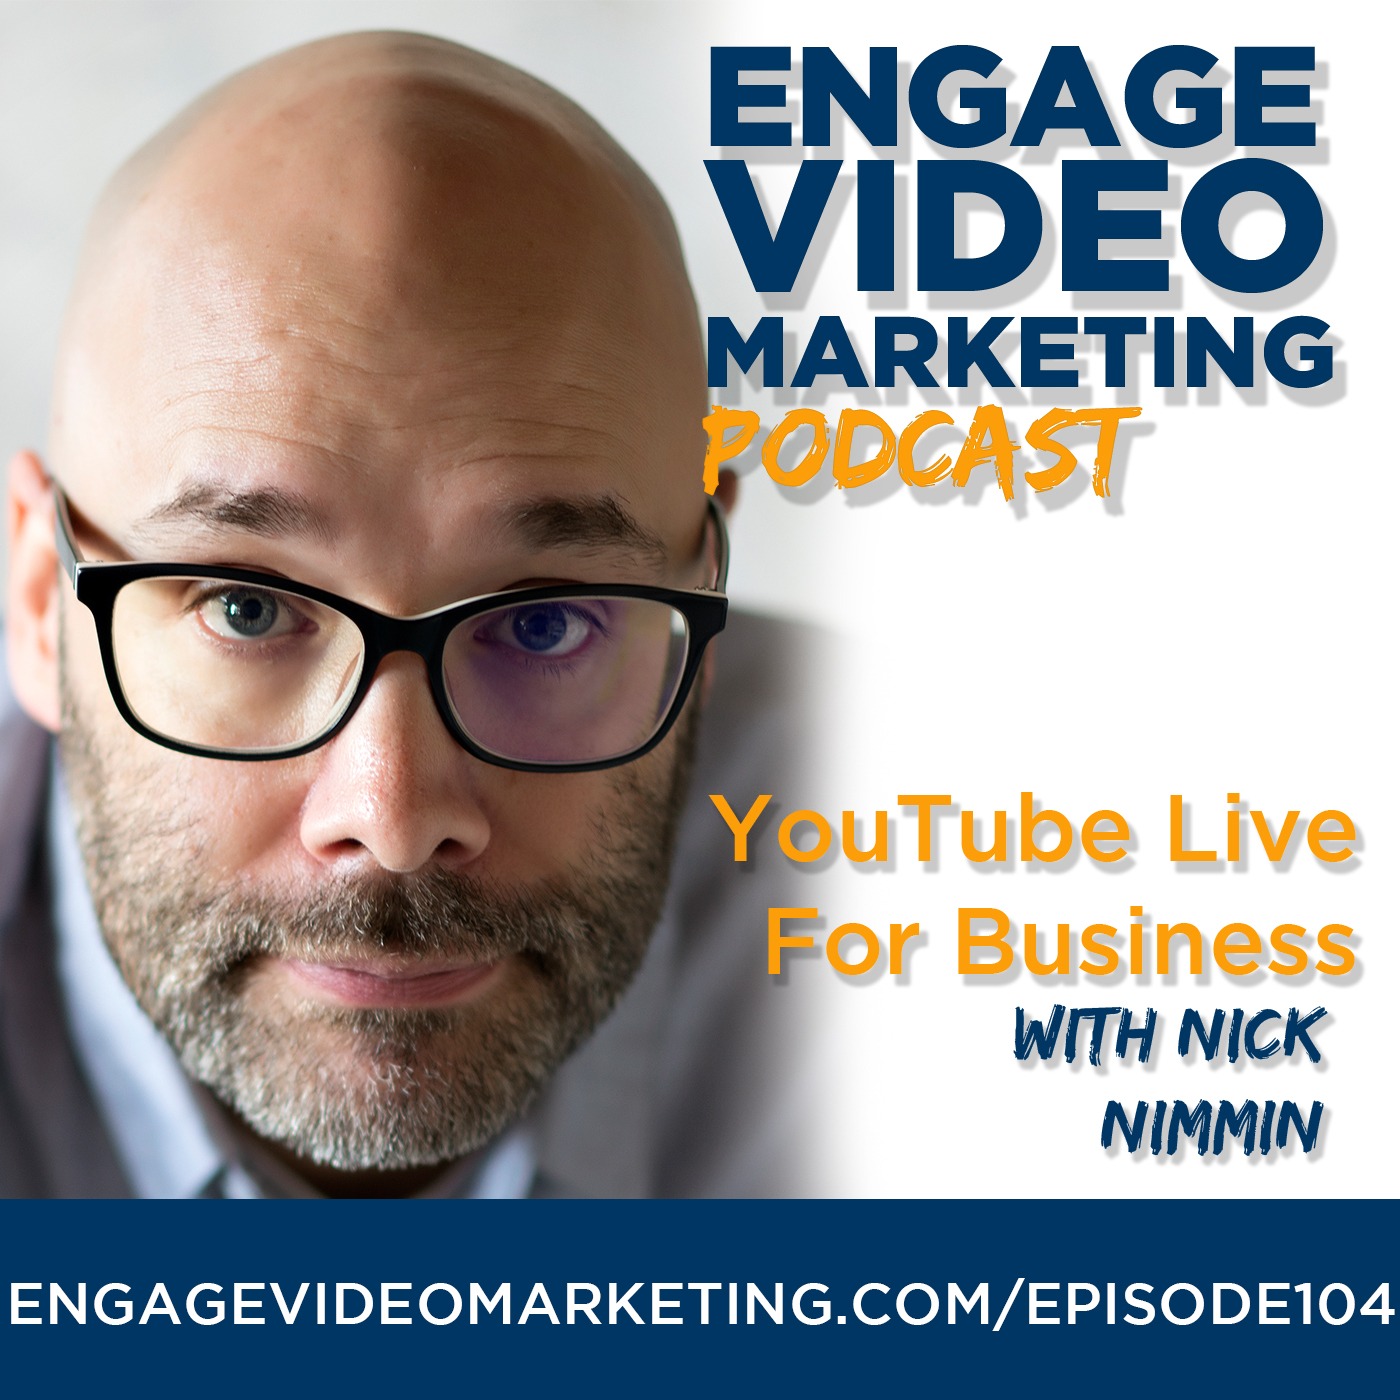 YouTube Live for Business with Nick Nimmin